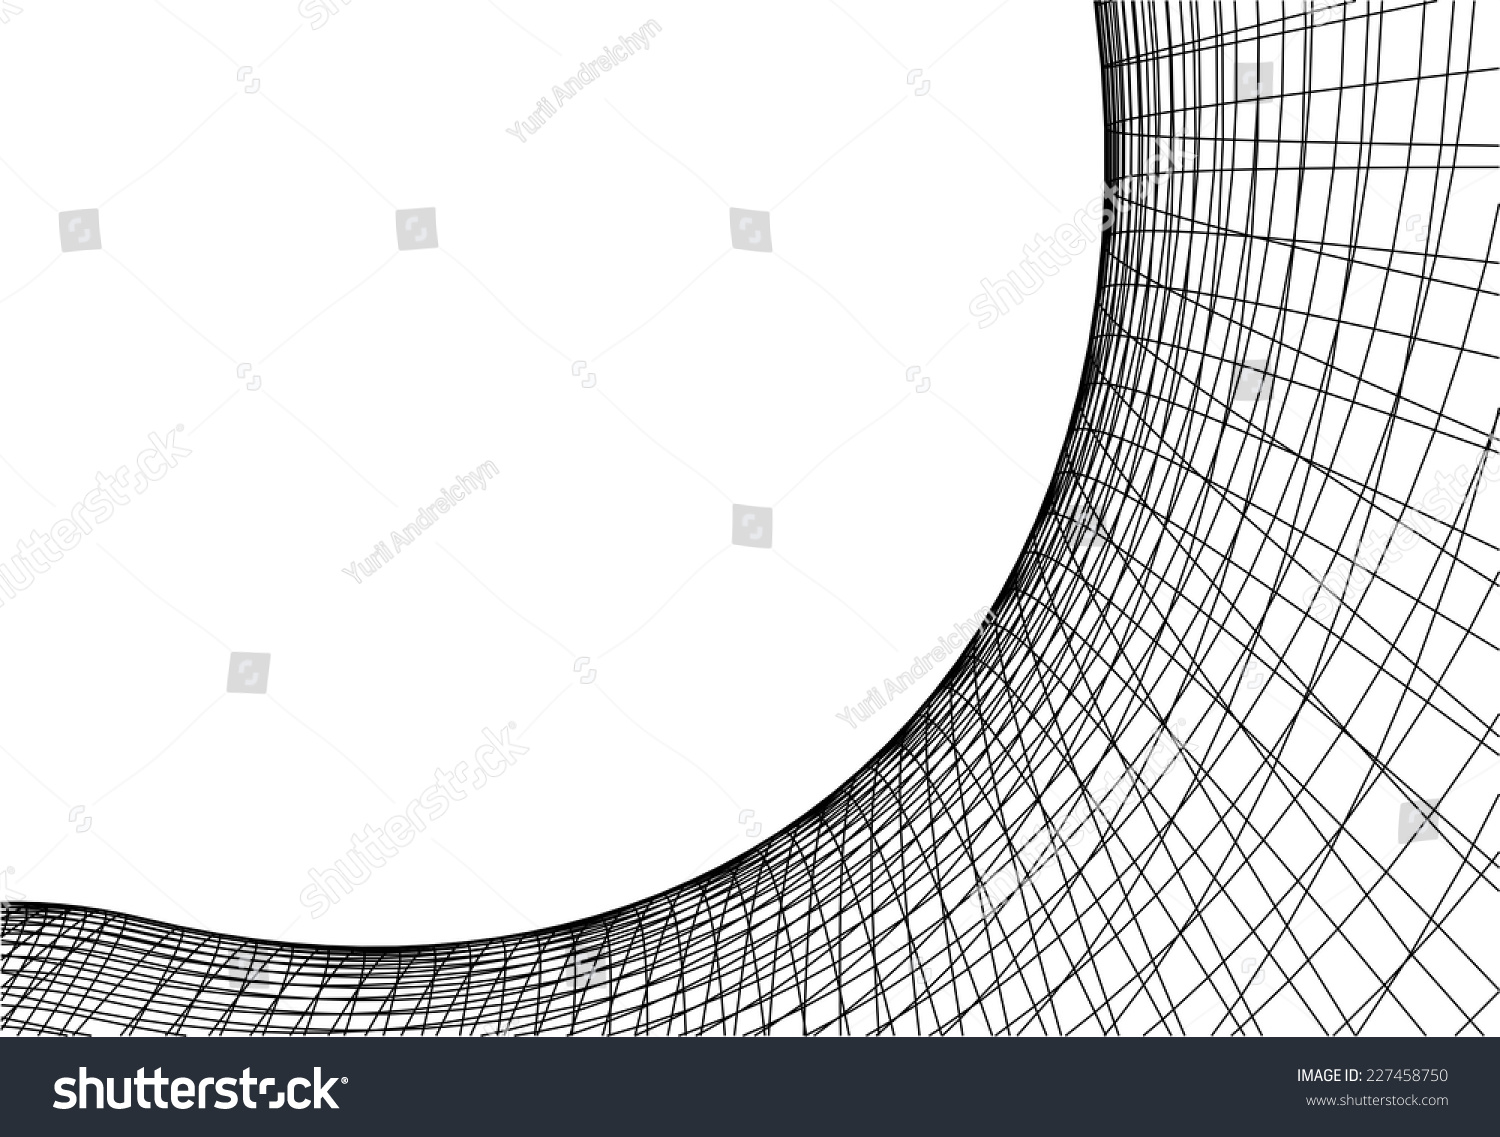 Abstract Linear Background Vector Stock Vector 227458750 - Shutterstock